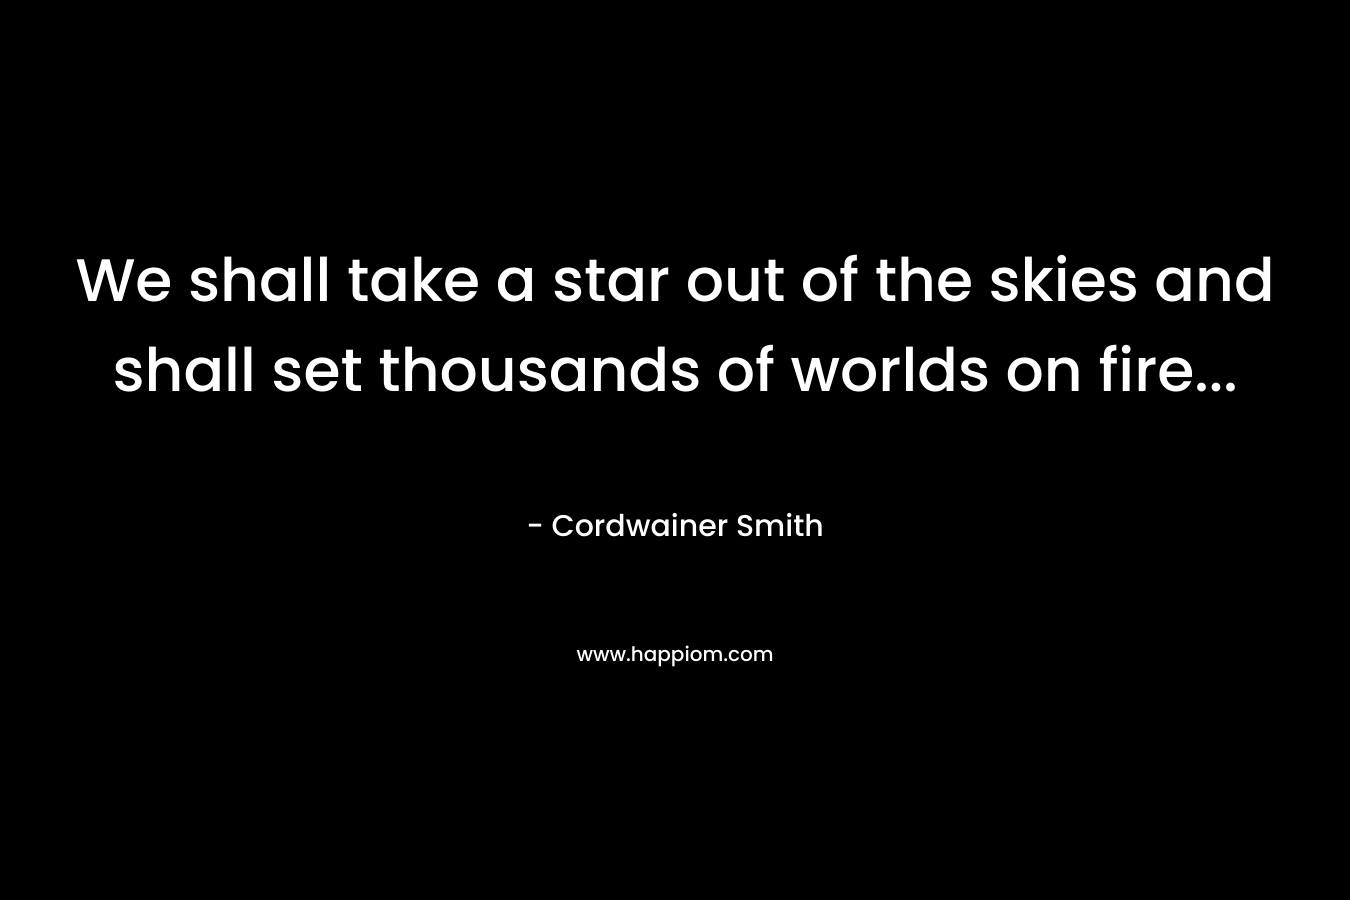 We shall take a star out of the skies and shall set thousands of worlds on fire...